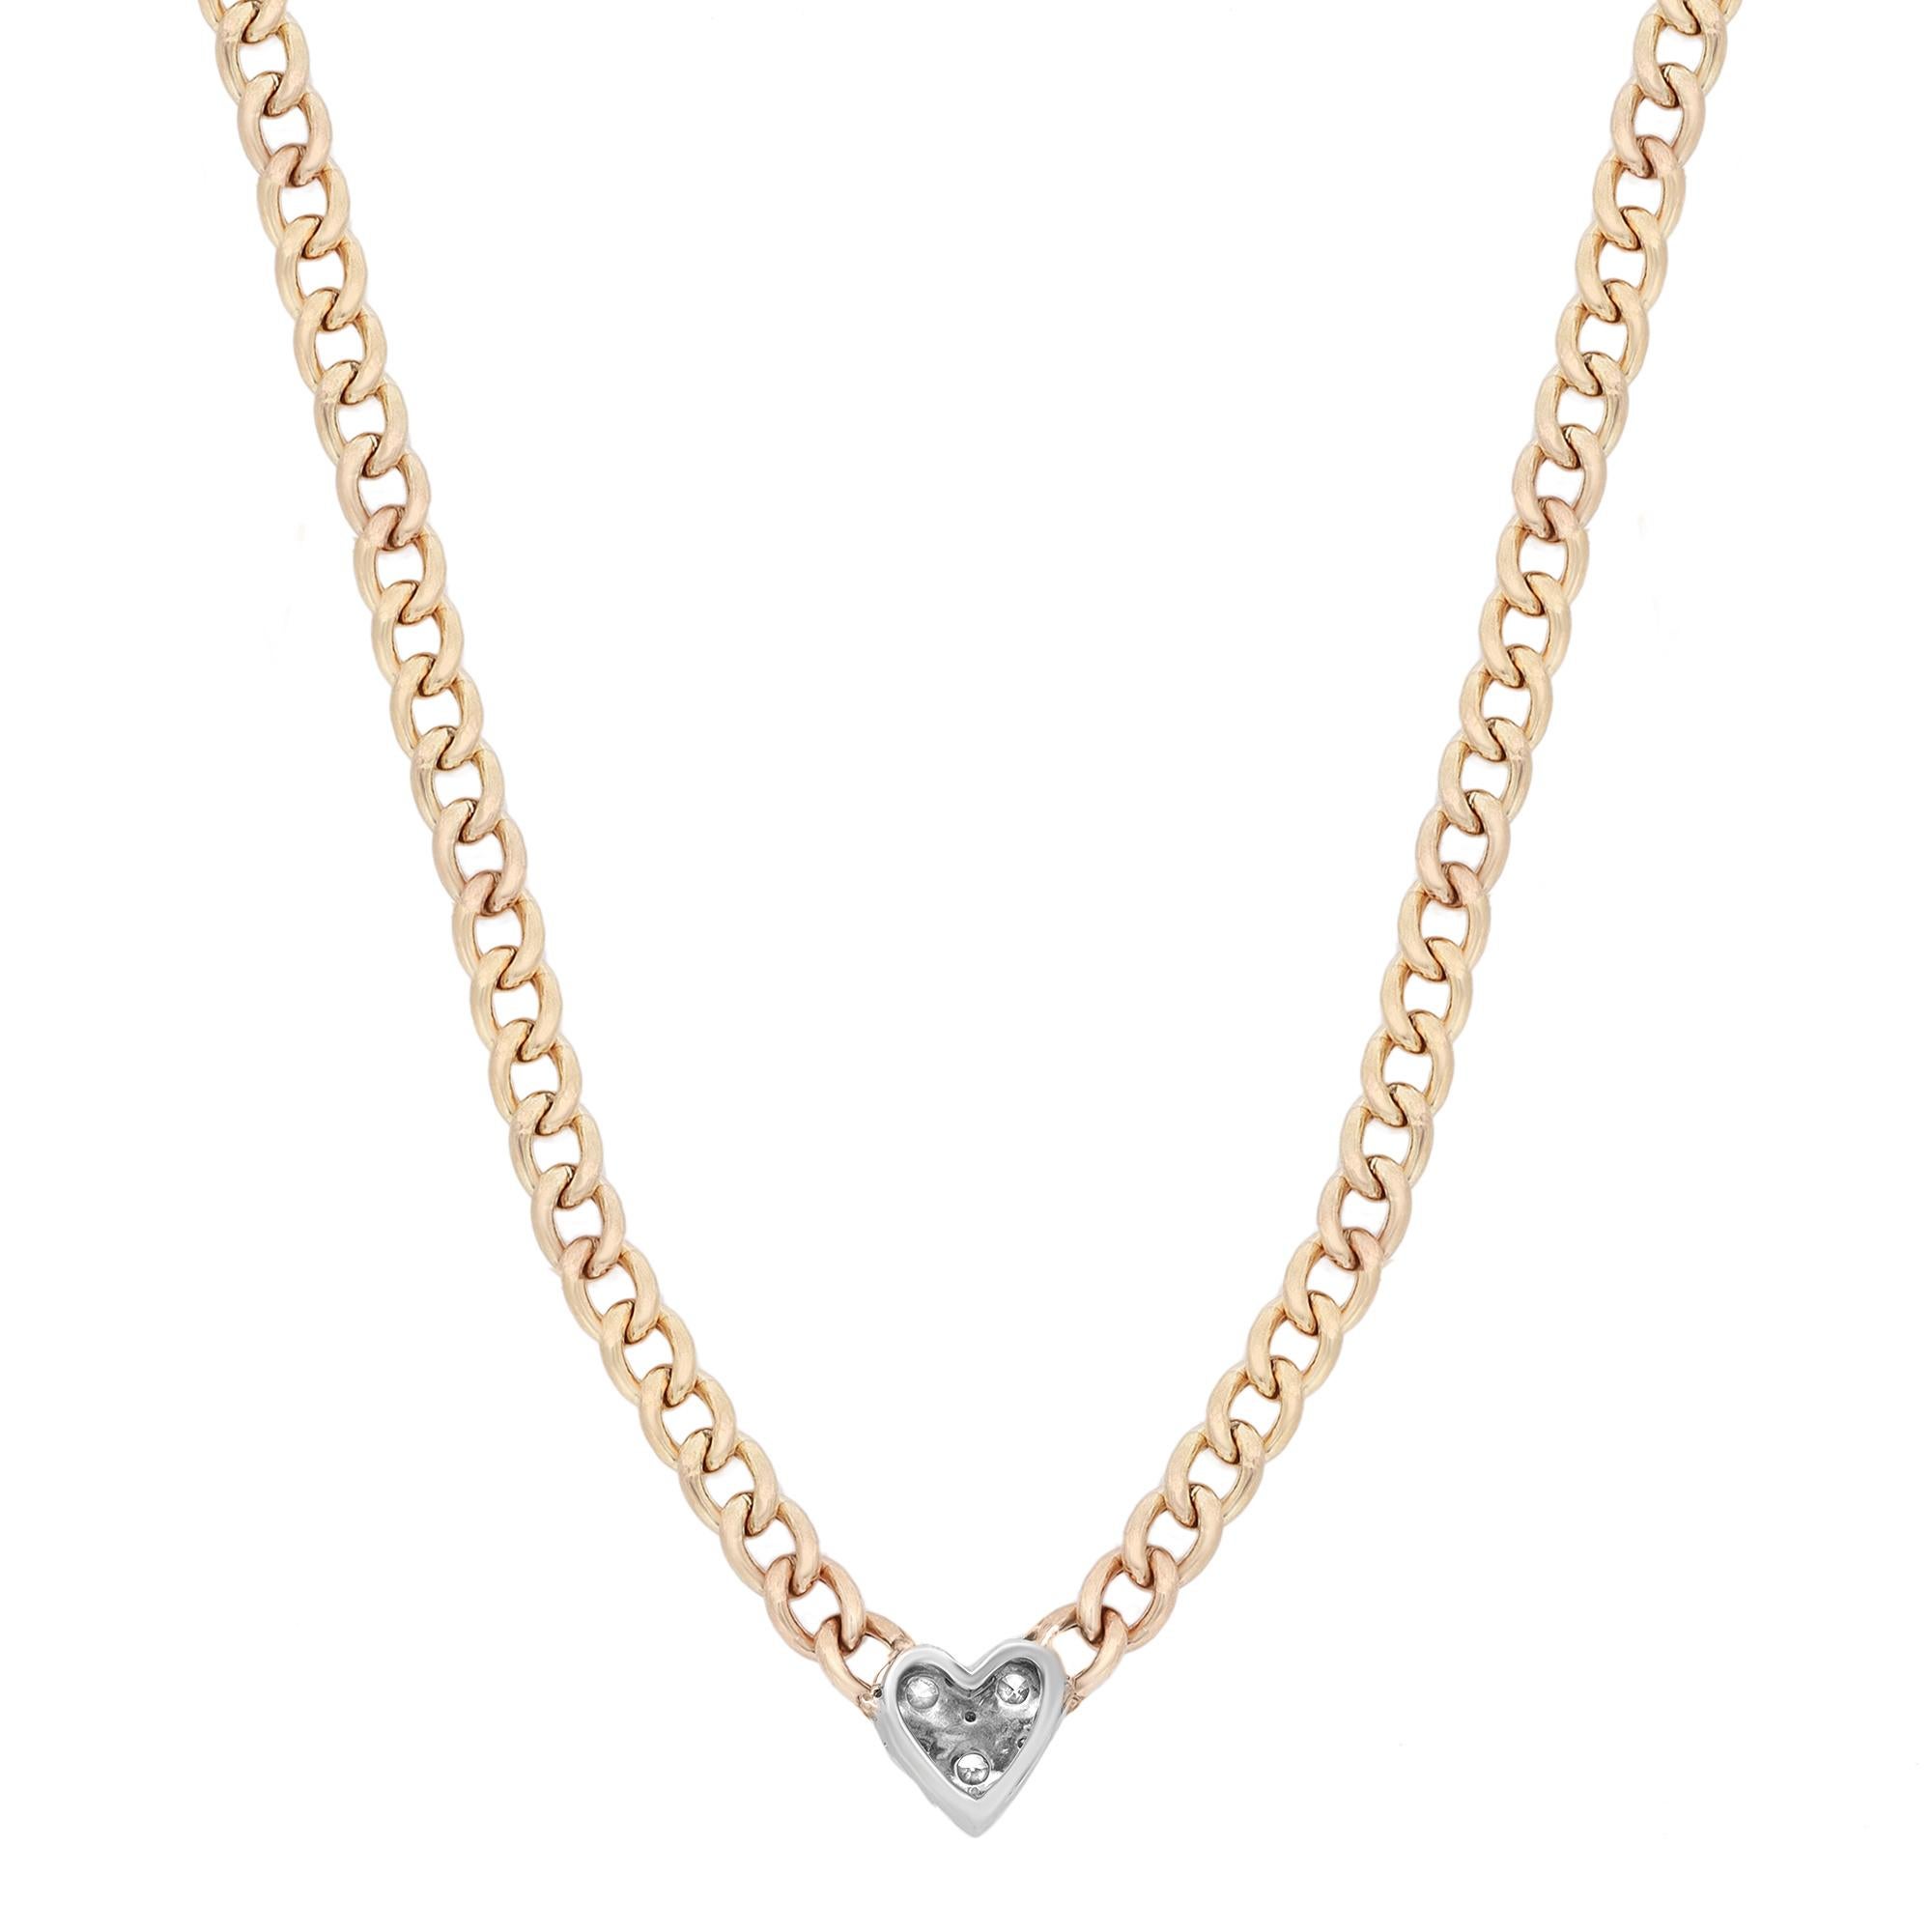 This beautiful diamond heart pendant necklace is a must have for your jewelry collection. Crafted in fine 14k yellow and white gold. It features 0.50 carat of prong set dazzling round brilliant cut diamonds encrusted in a heart shape shank giving an